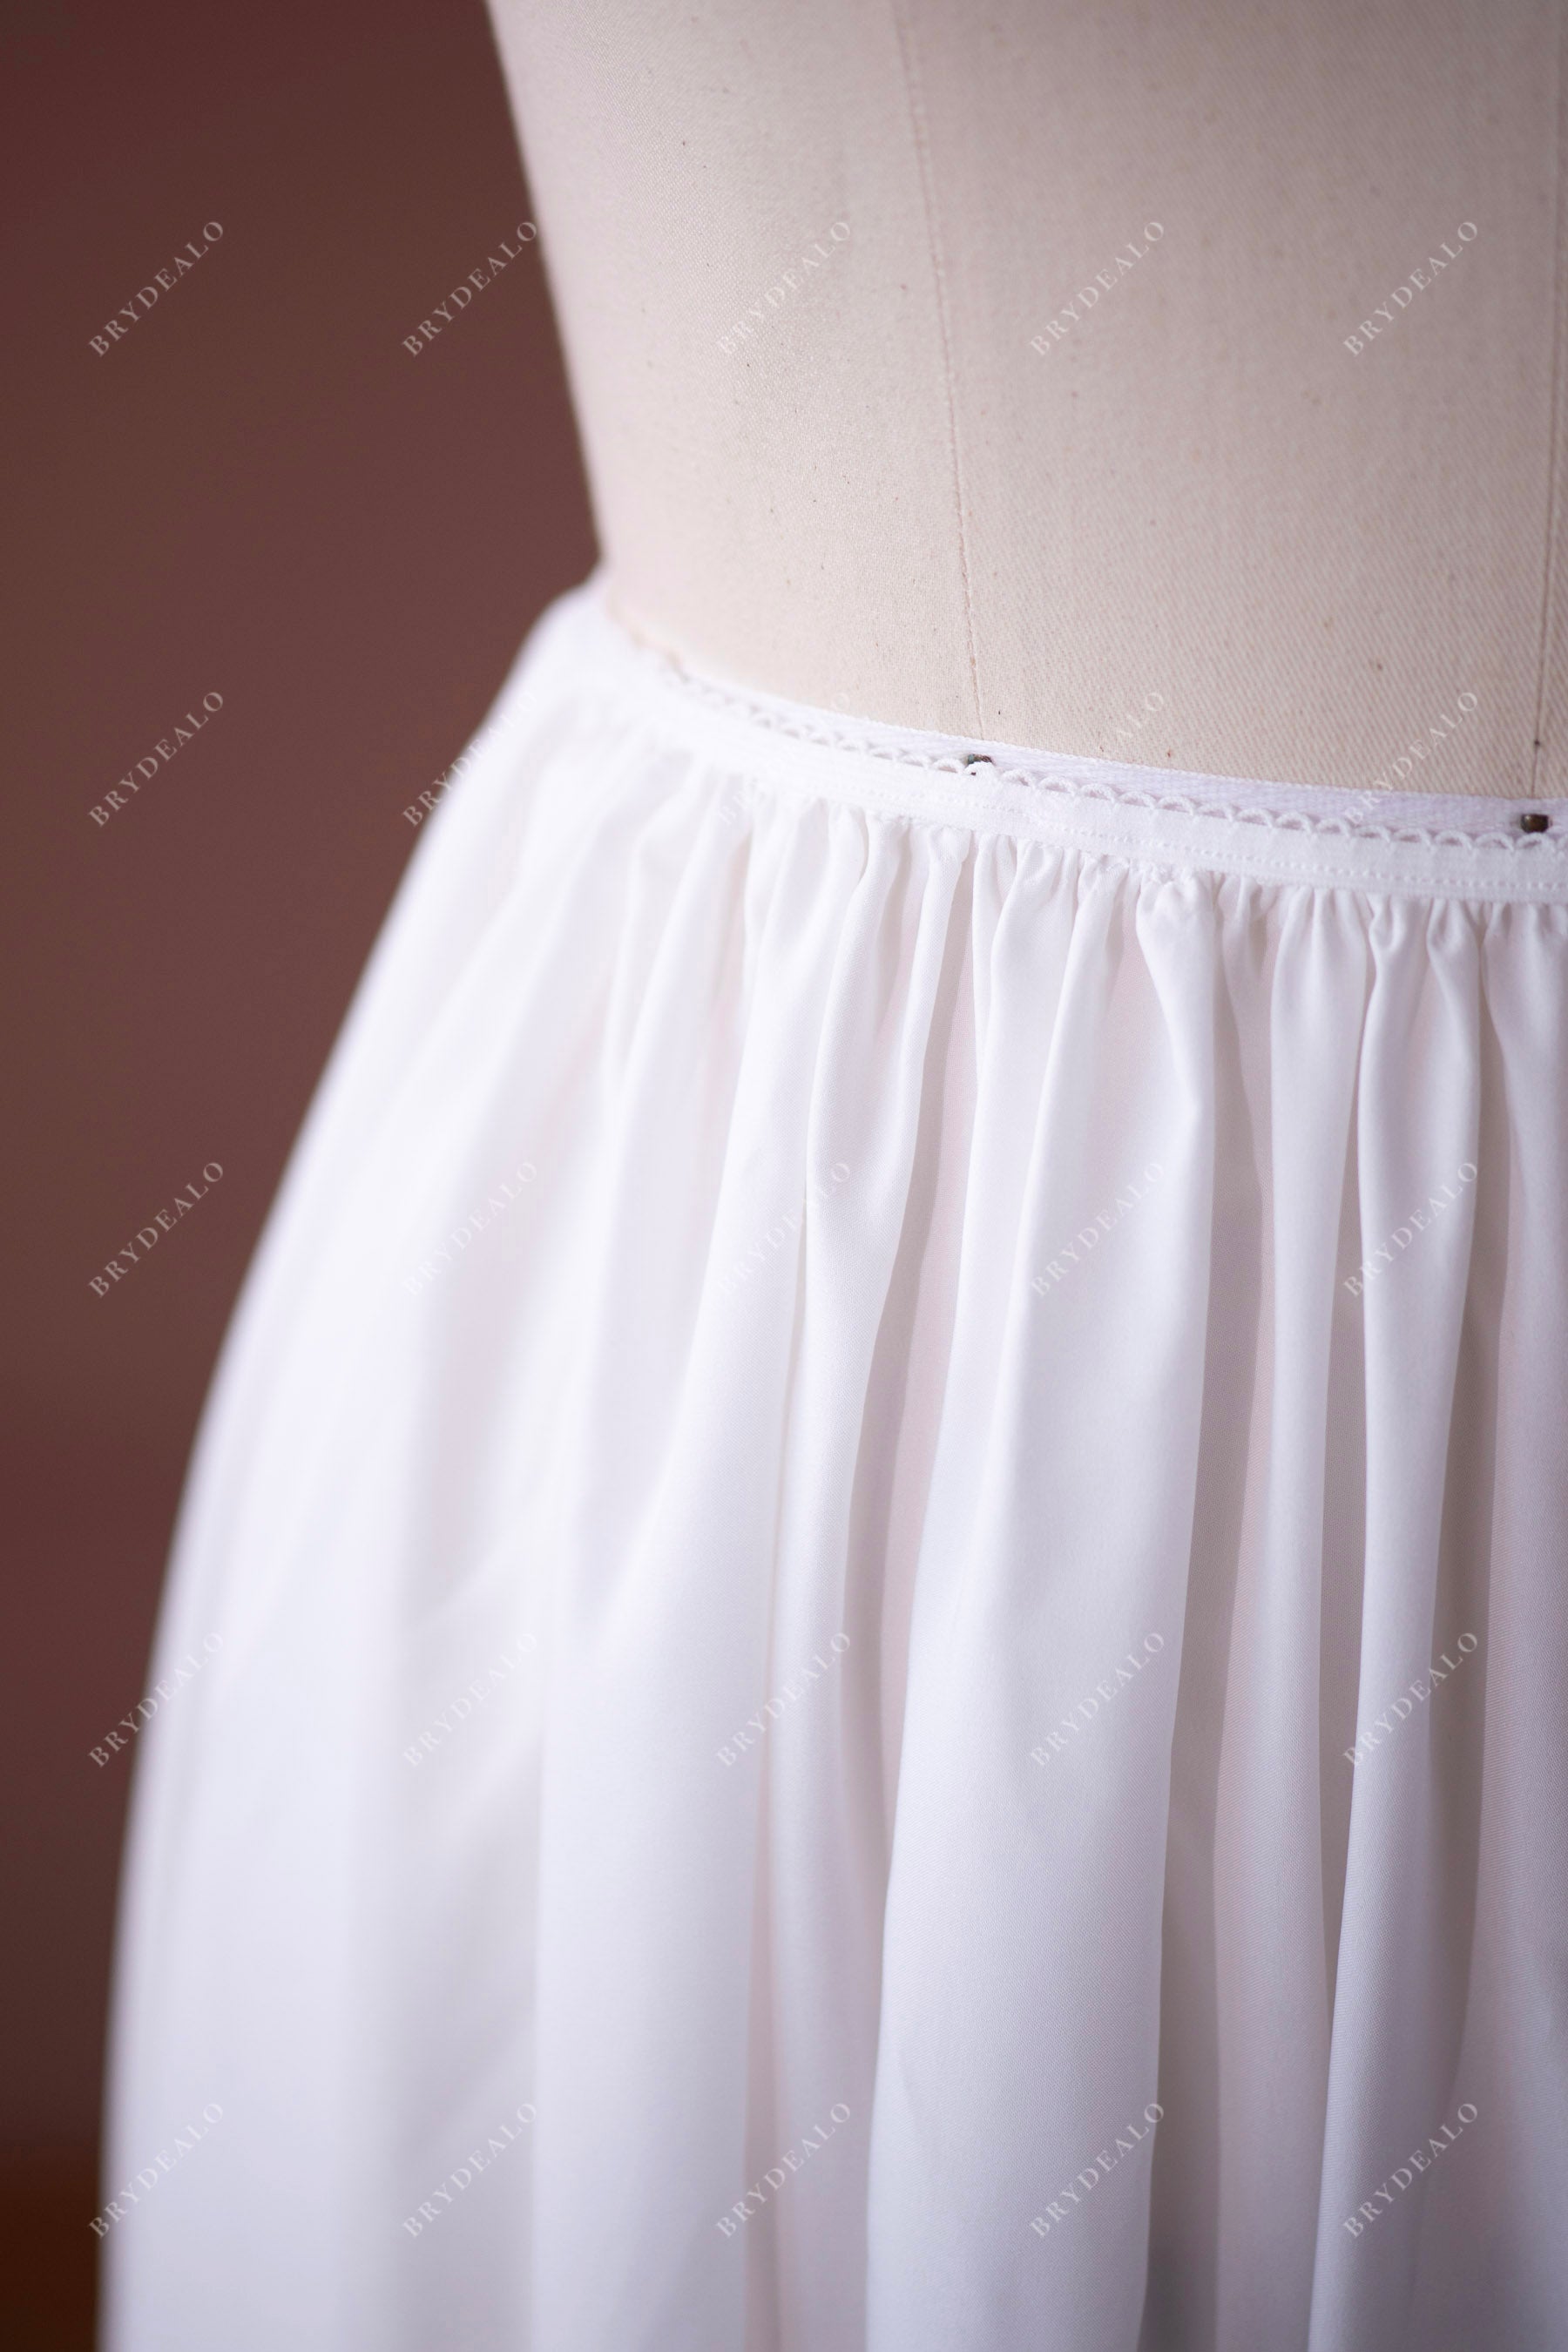 soft cotton like skirt lining with elastic band